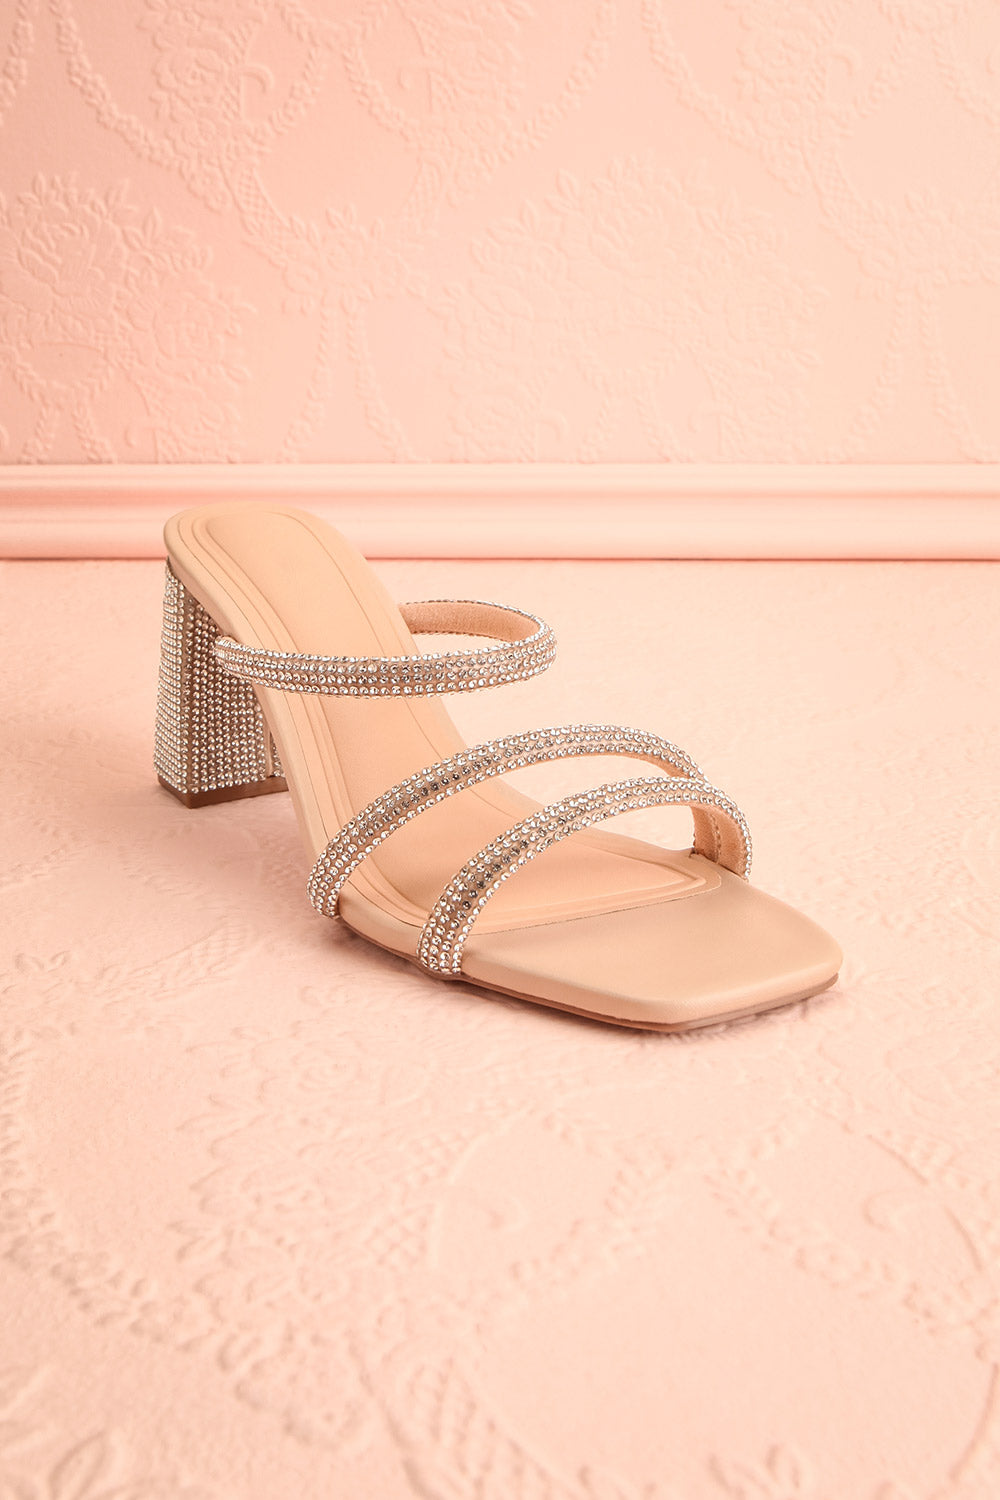 Zephra Beige Strappy Sandals w/ Crystals | Boutique 1861 front view